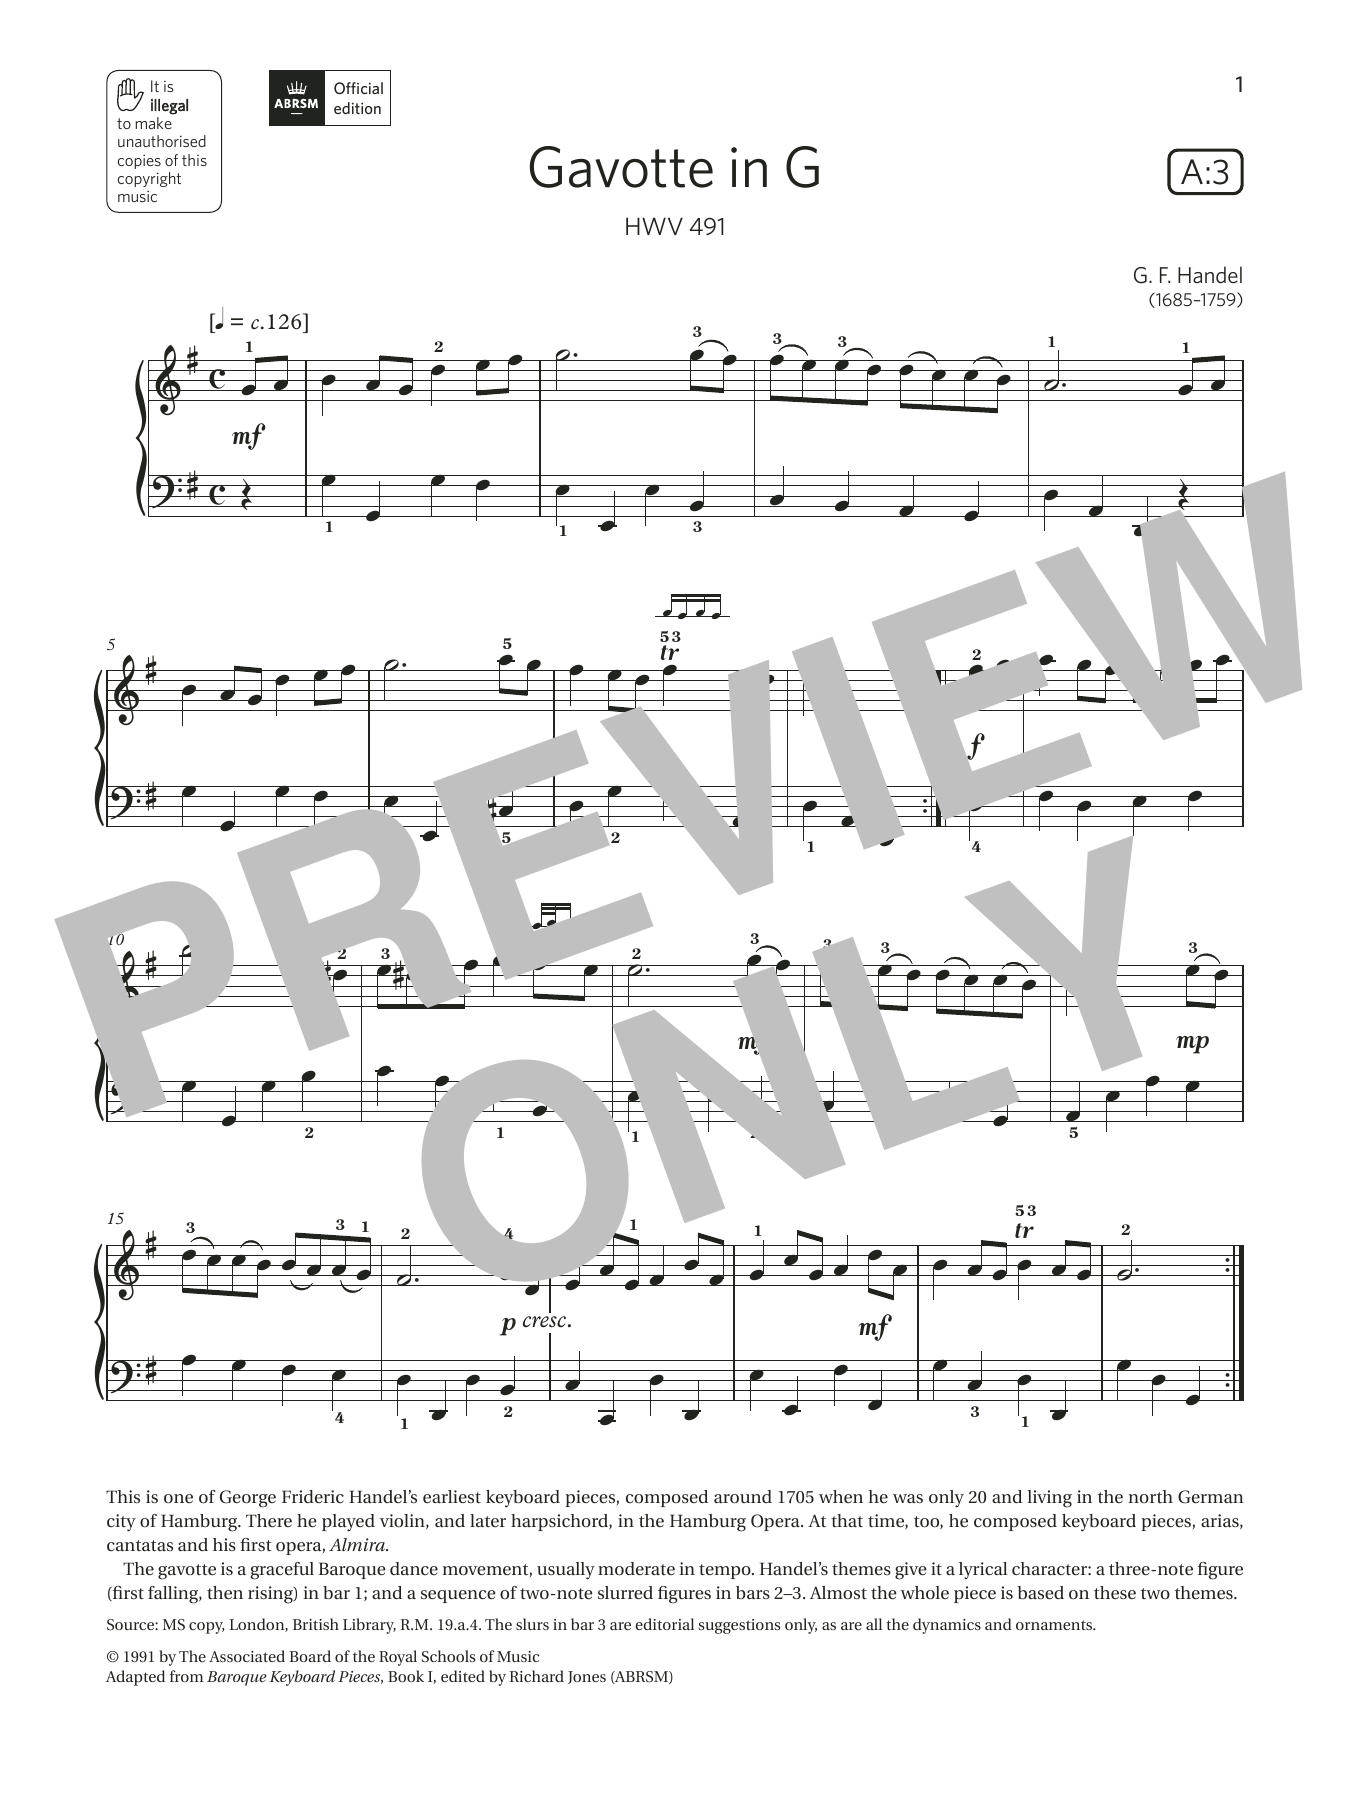 Download G. F. Handel Gavotte in G (Grade 3, list A3, from th Sheet Music